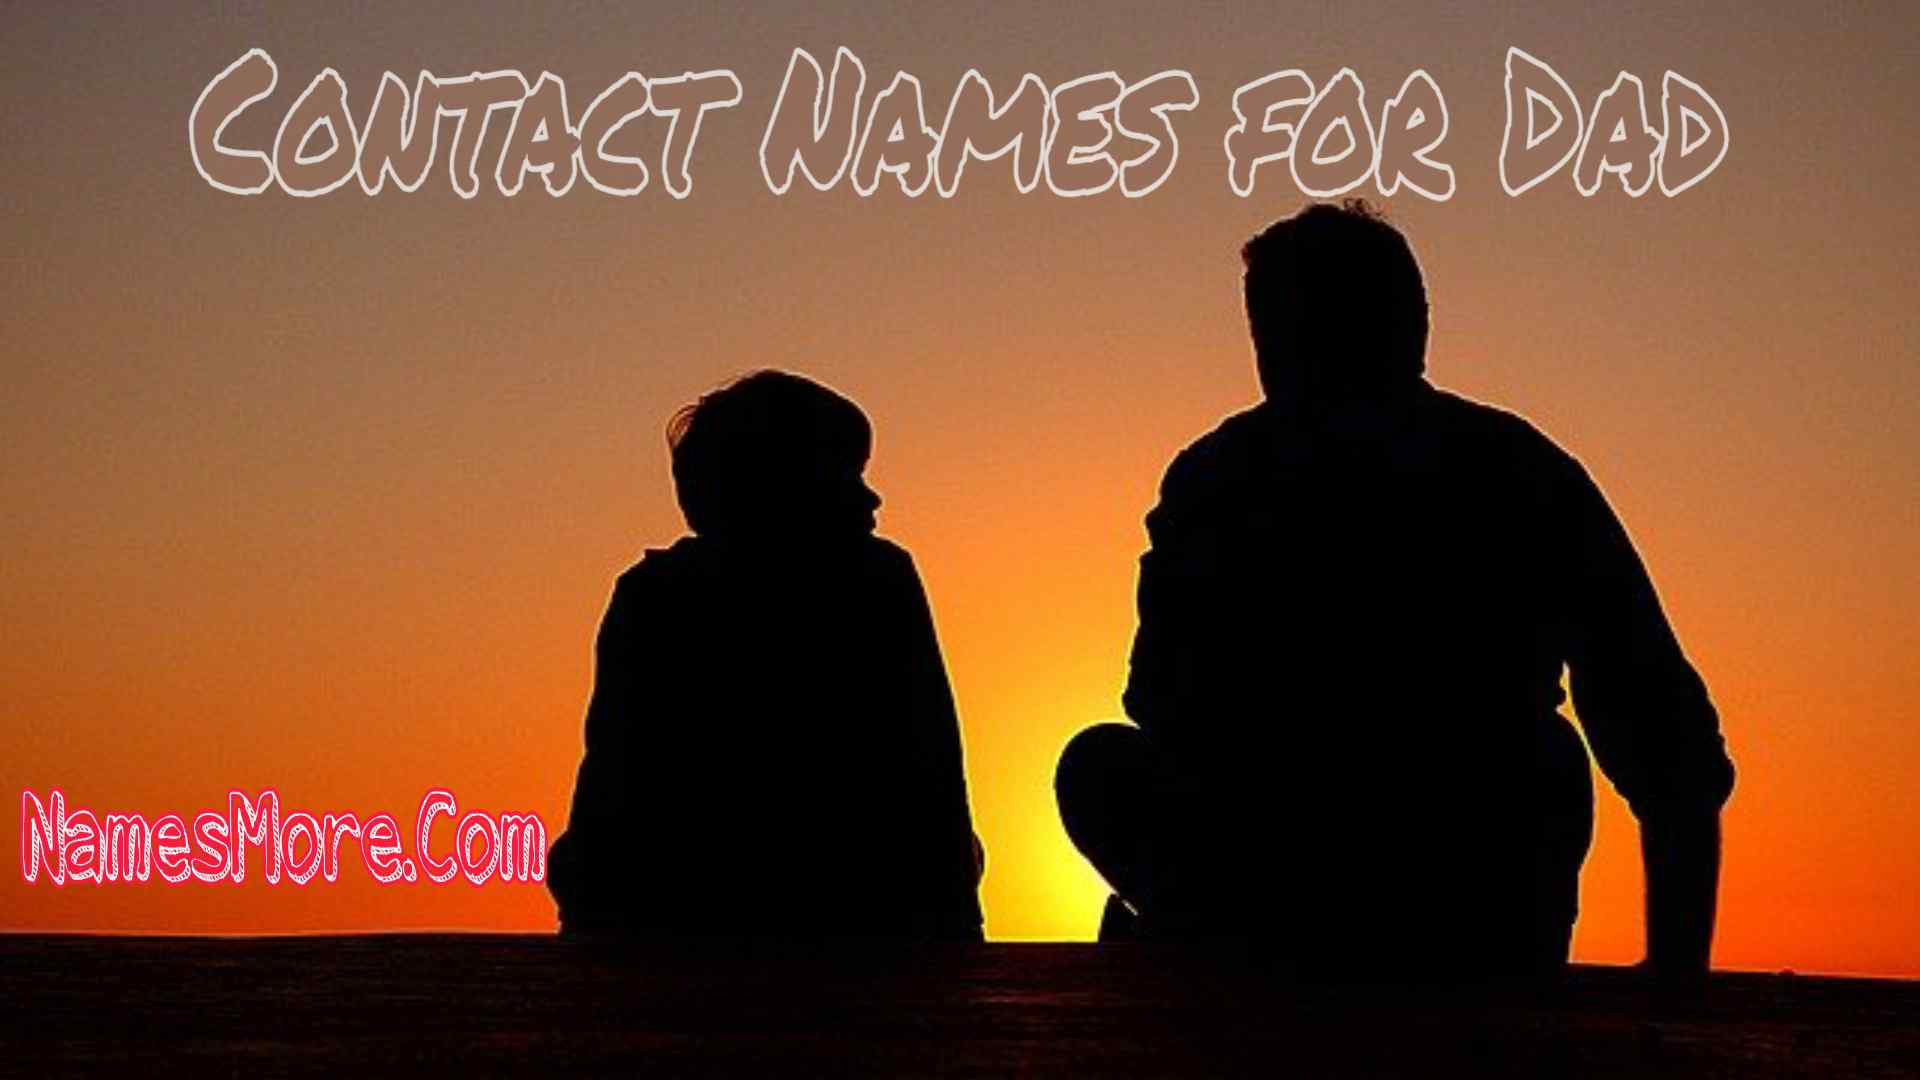 Featured Image for Contact Names For Dad [950+ Best, Unique & Catchy Nicknames For Dad]